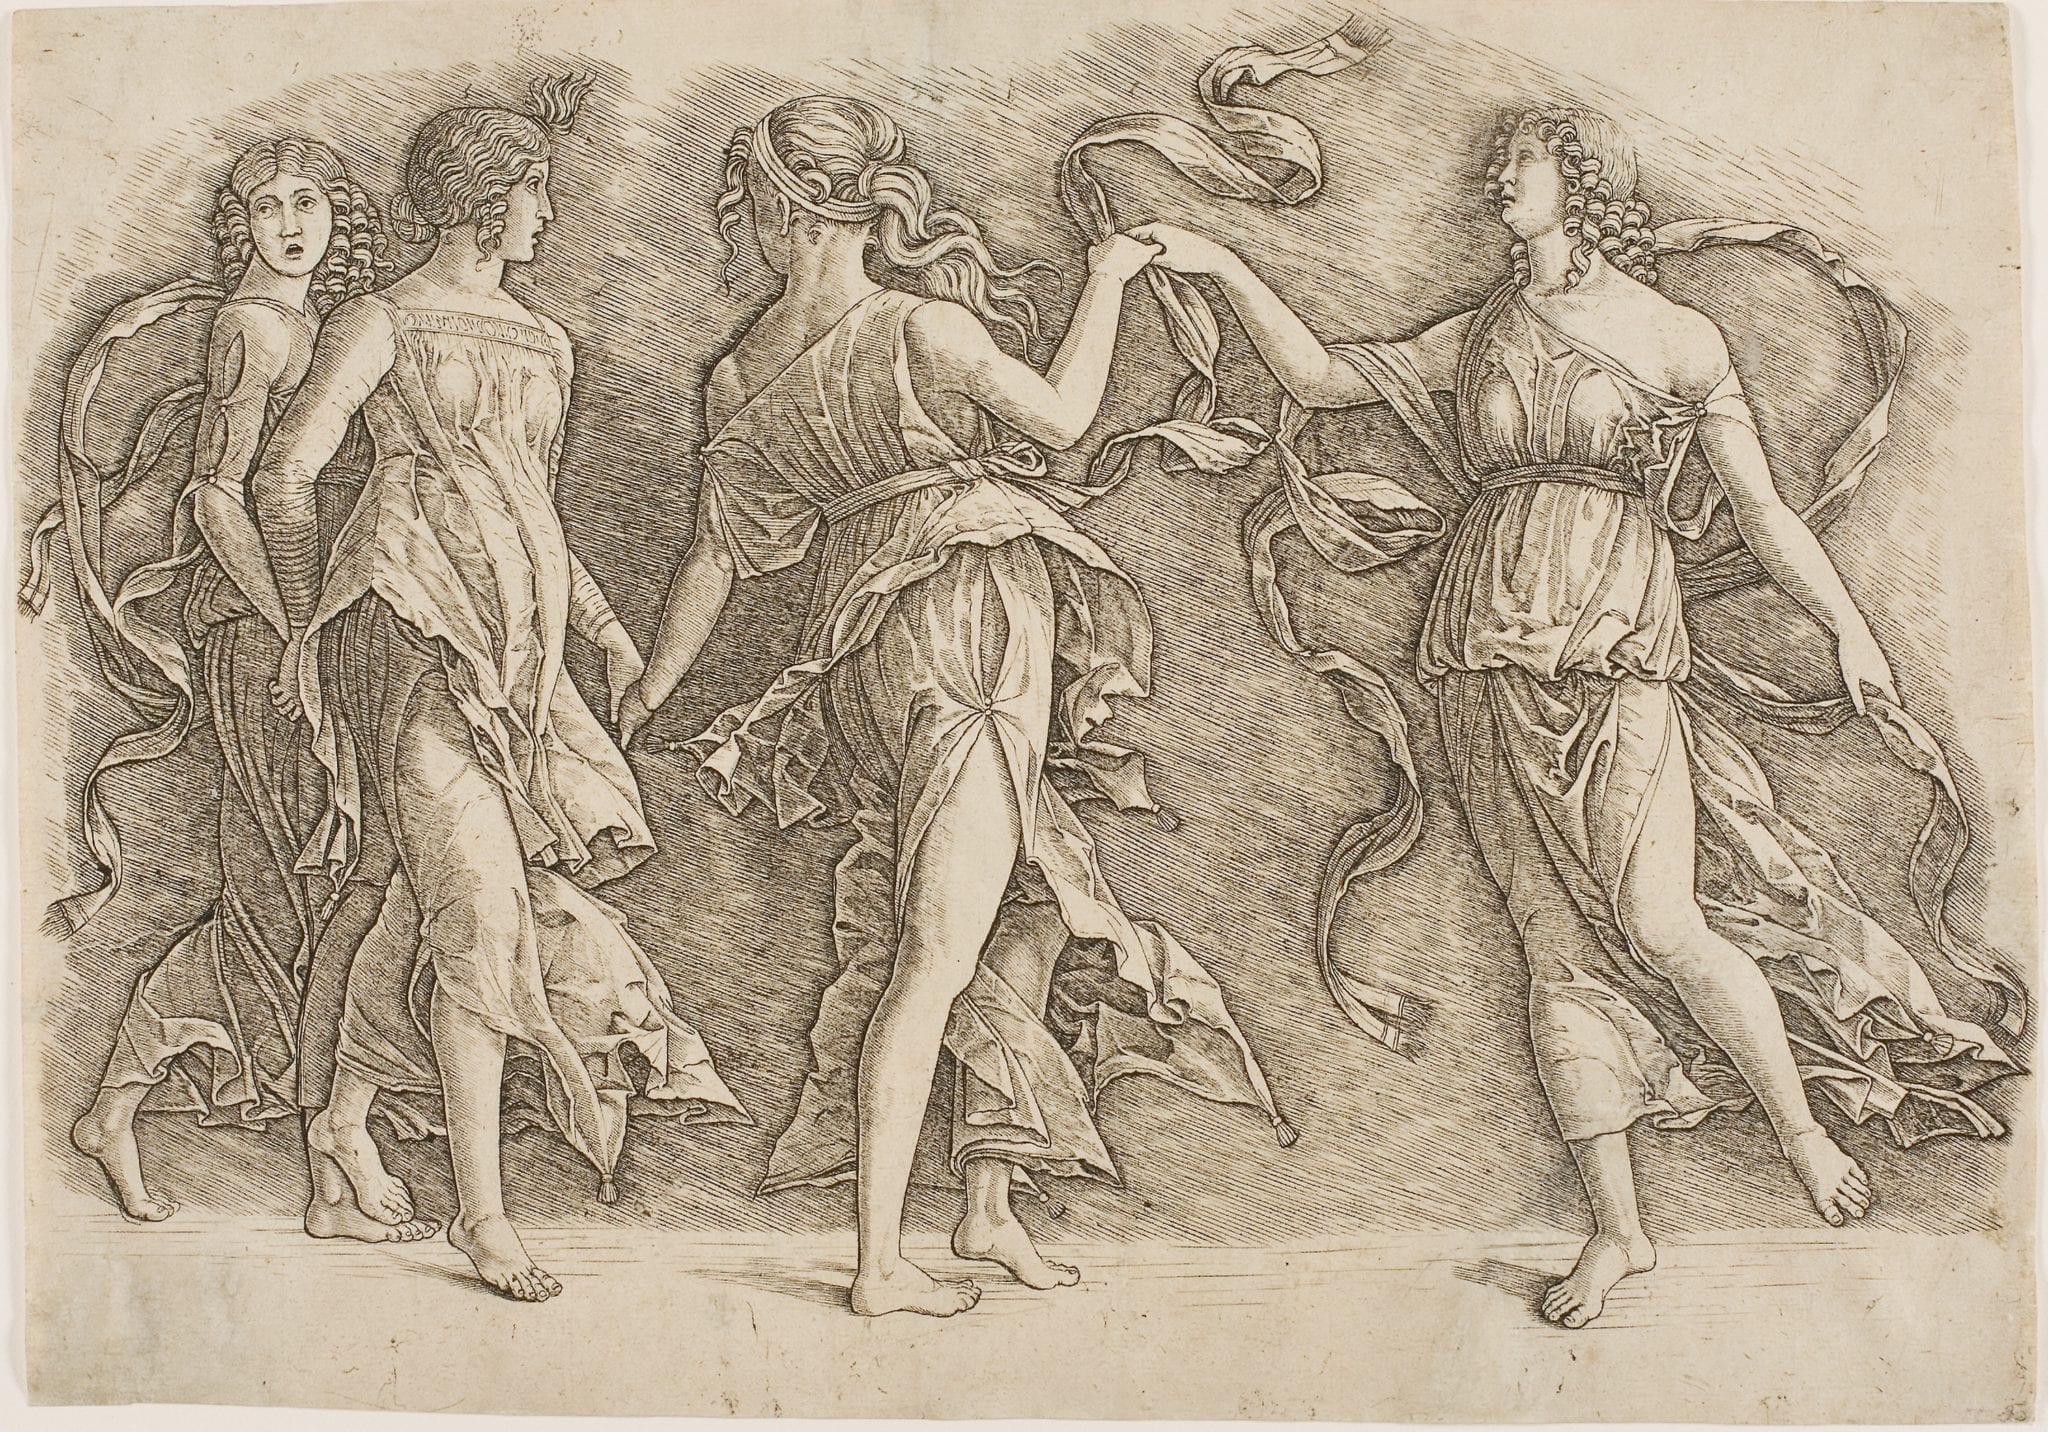 Print of four women dancing while holding hands